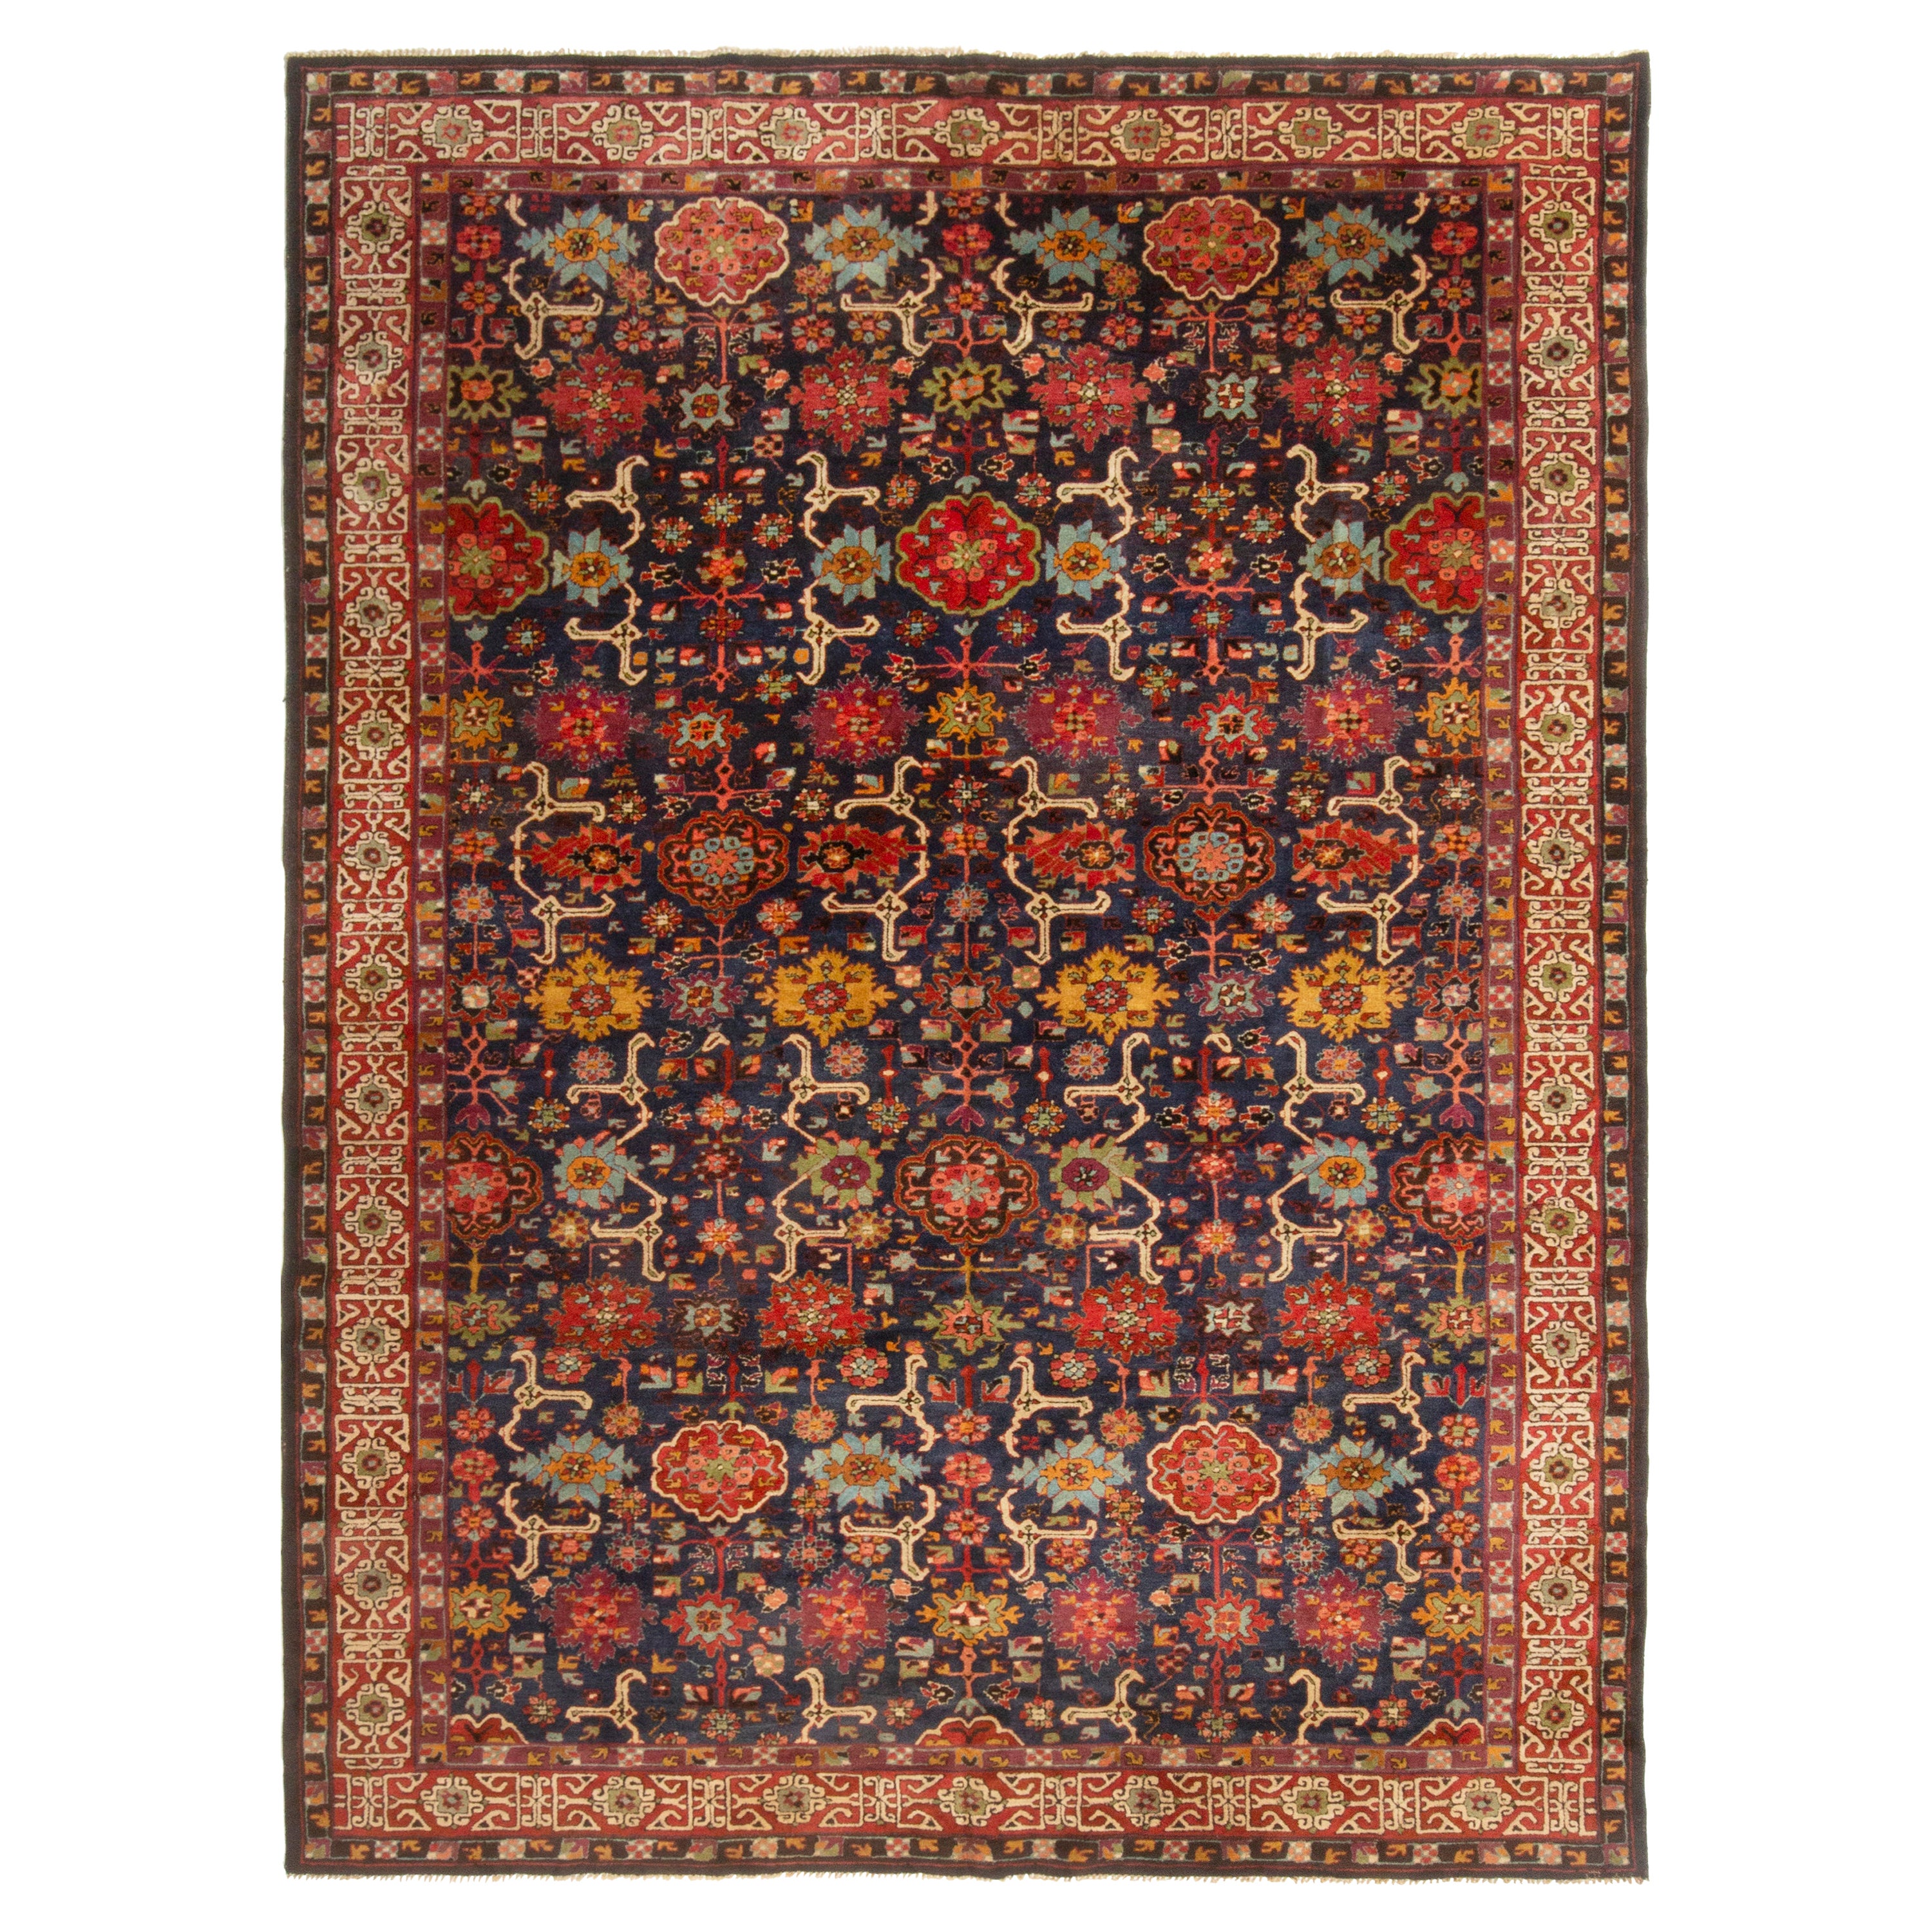 Antique German Blue and Red Rug with Floral Patterns by Rug & Kilim For Sale